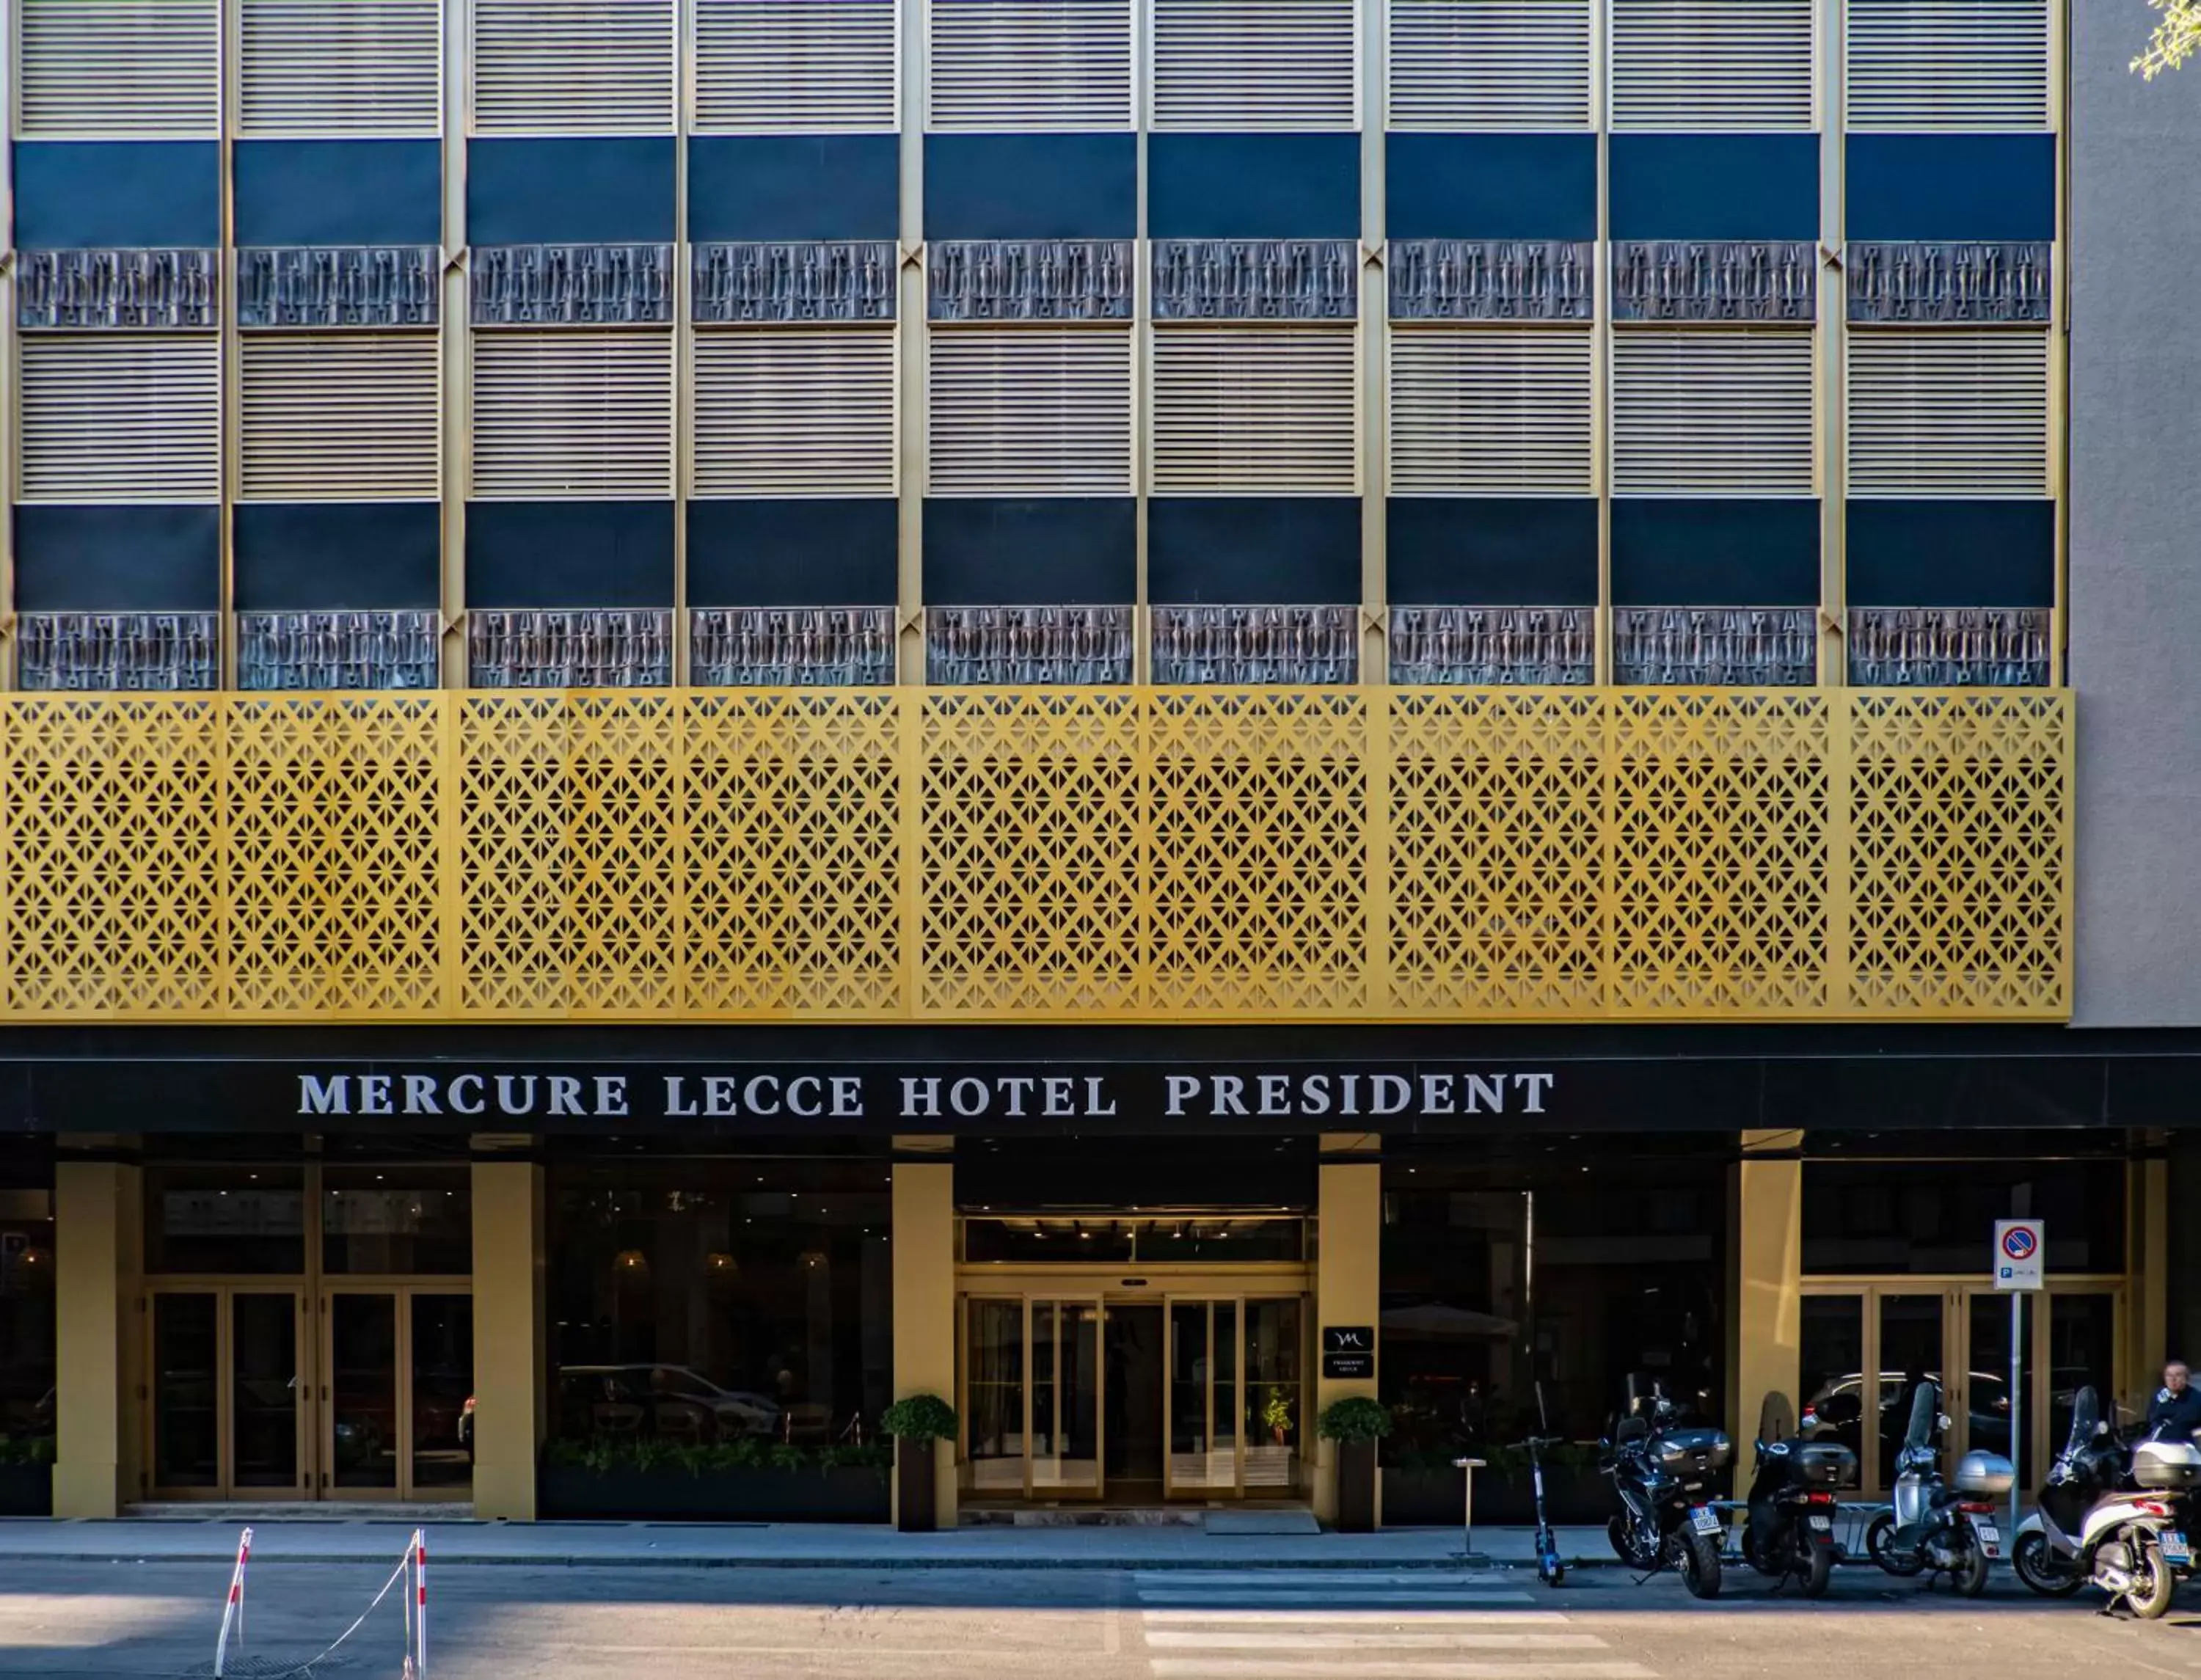 Property Building in Mercure Hotel President Lecce